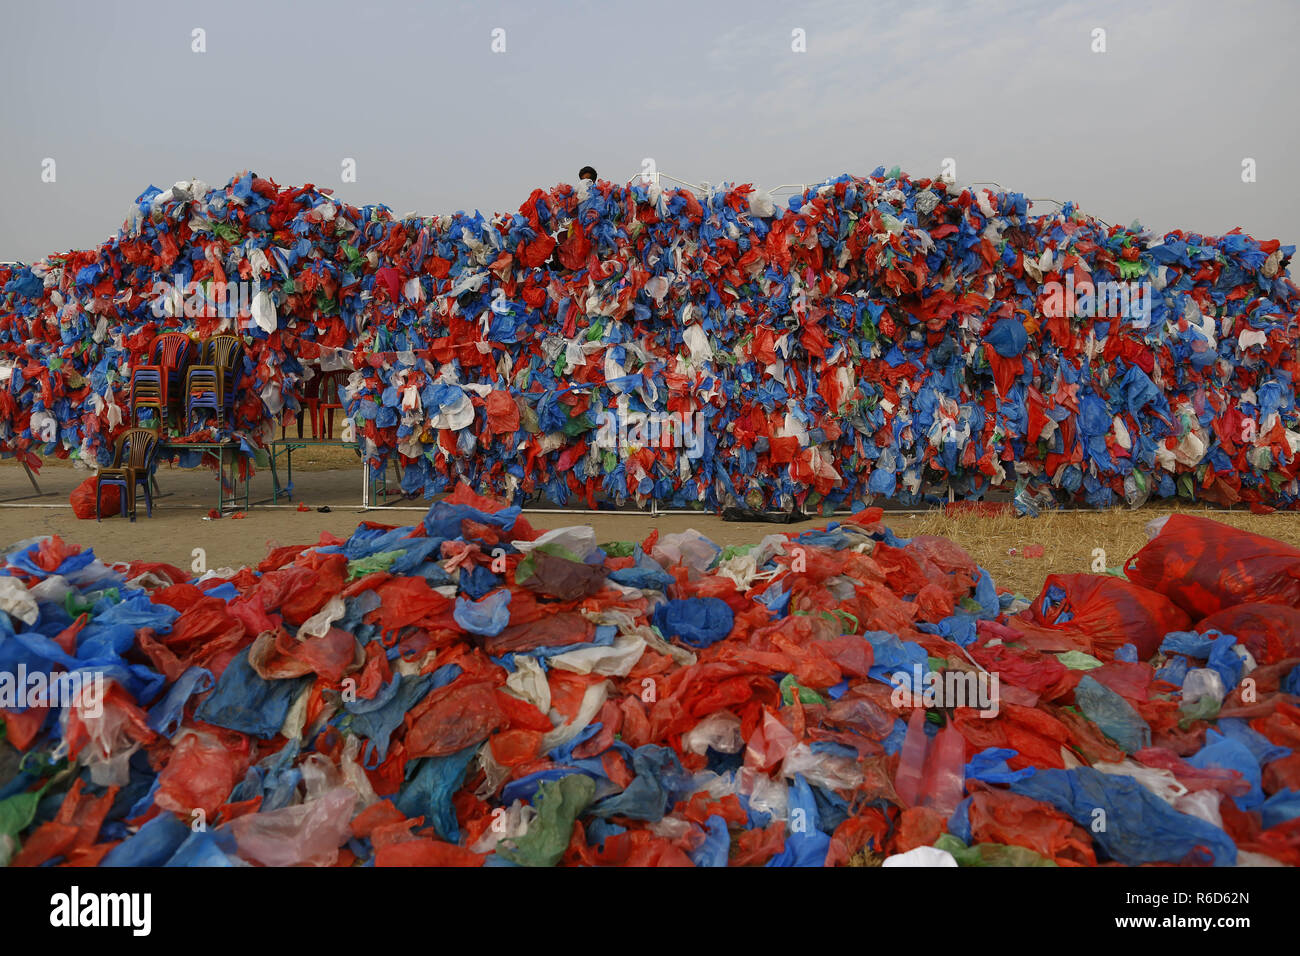 Kathmandu, Nepal. 5th Dec, 2018. Volunteers make the Dead Sea map in an attempt to break the Guinness World Records using the highest number of plastic bags with the slogan ''One Dead Sea is enough for us'' at Tundikhel grounds in Kathmandu, Nepal on Wednesday, December 05, 2018. Credit: Skanda Gautam/ZUMA Wire/Alamy Live News Stock Photo